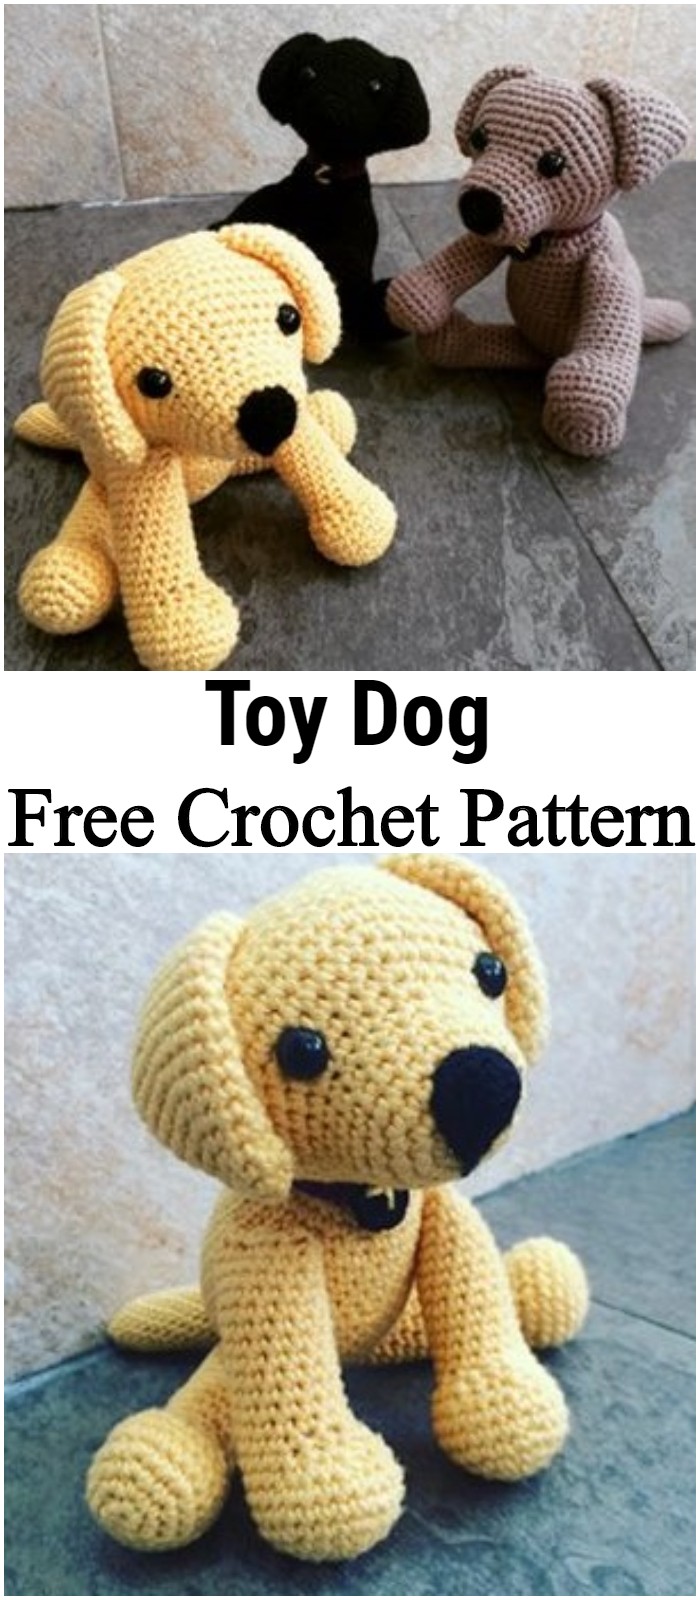 Crochet Pattern For Toy Dog